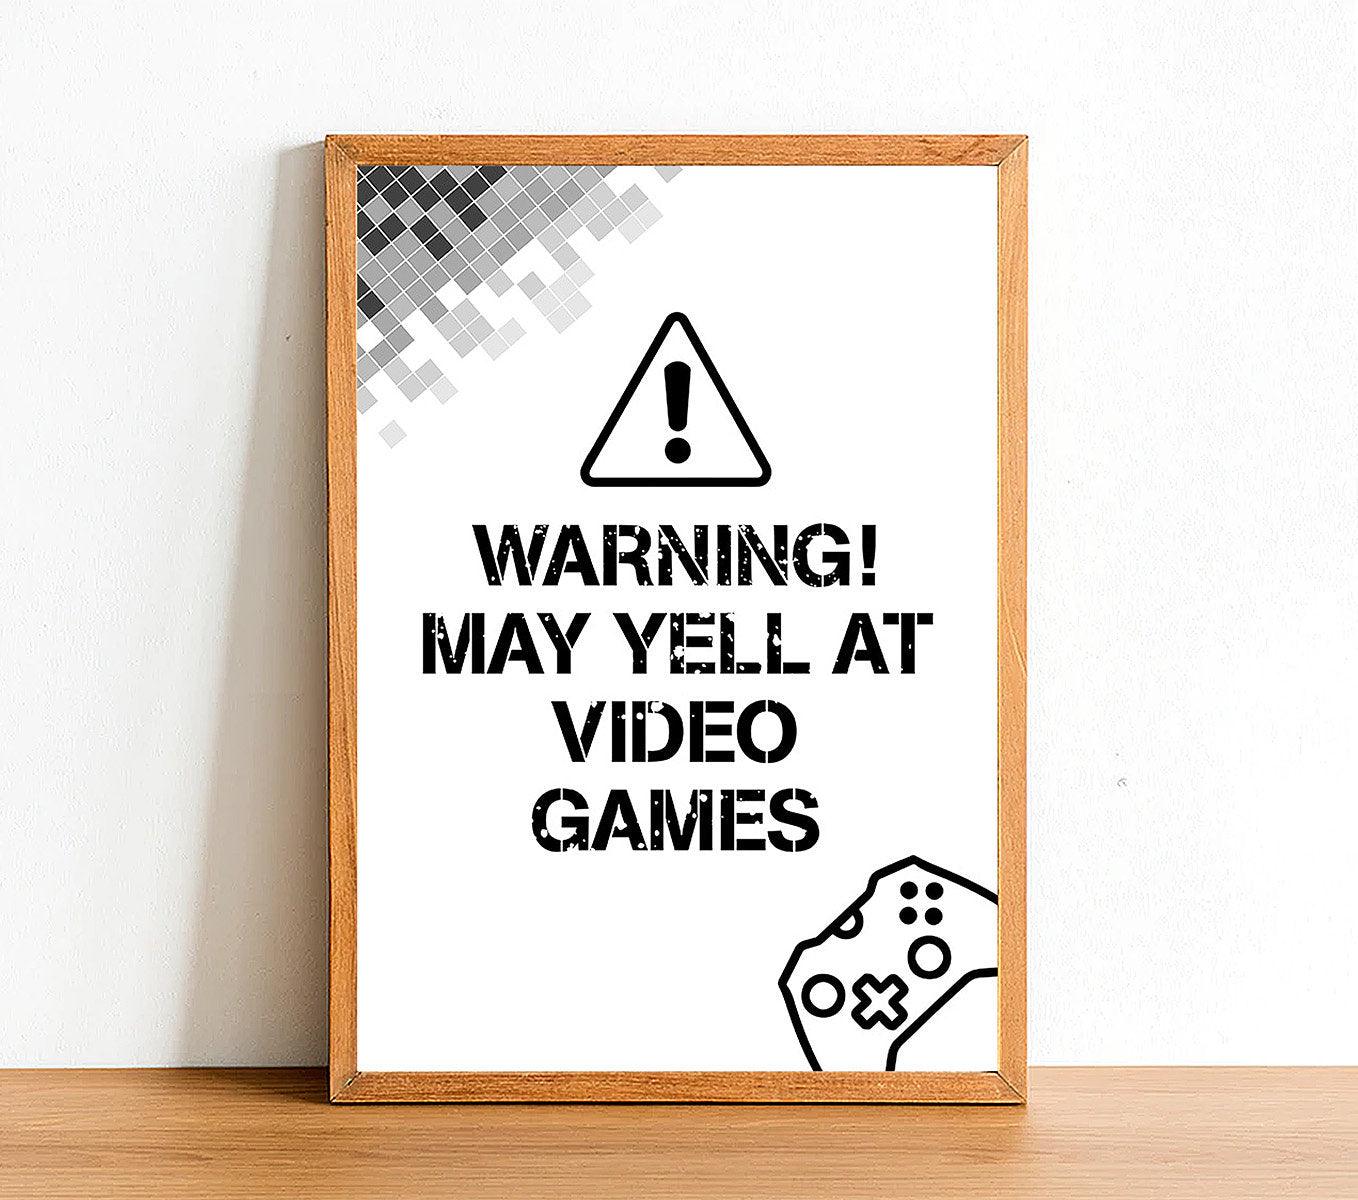 Gaming Posters & Video Game Wall Art